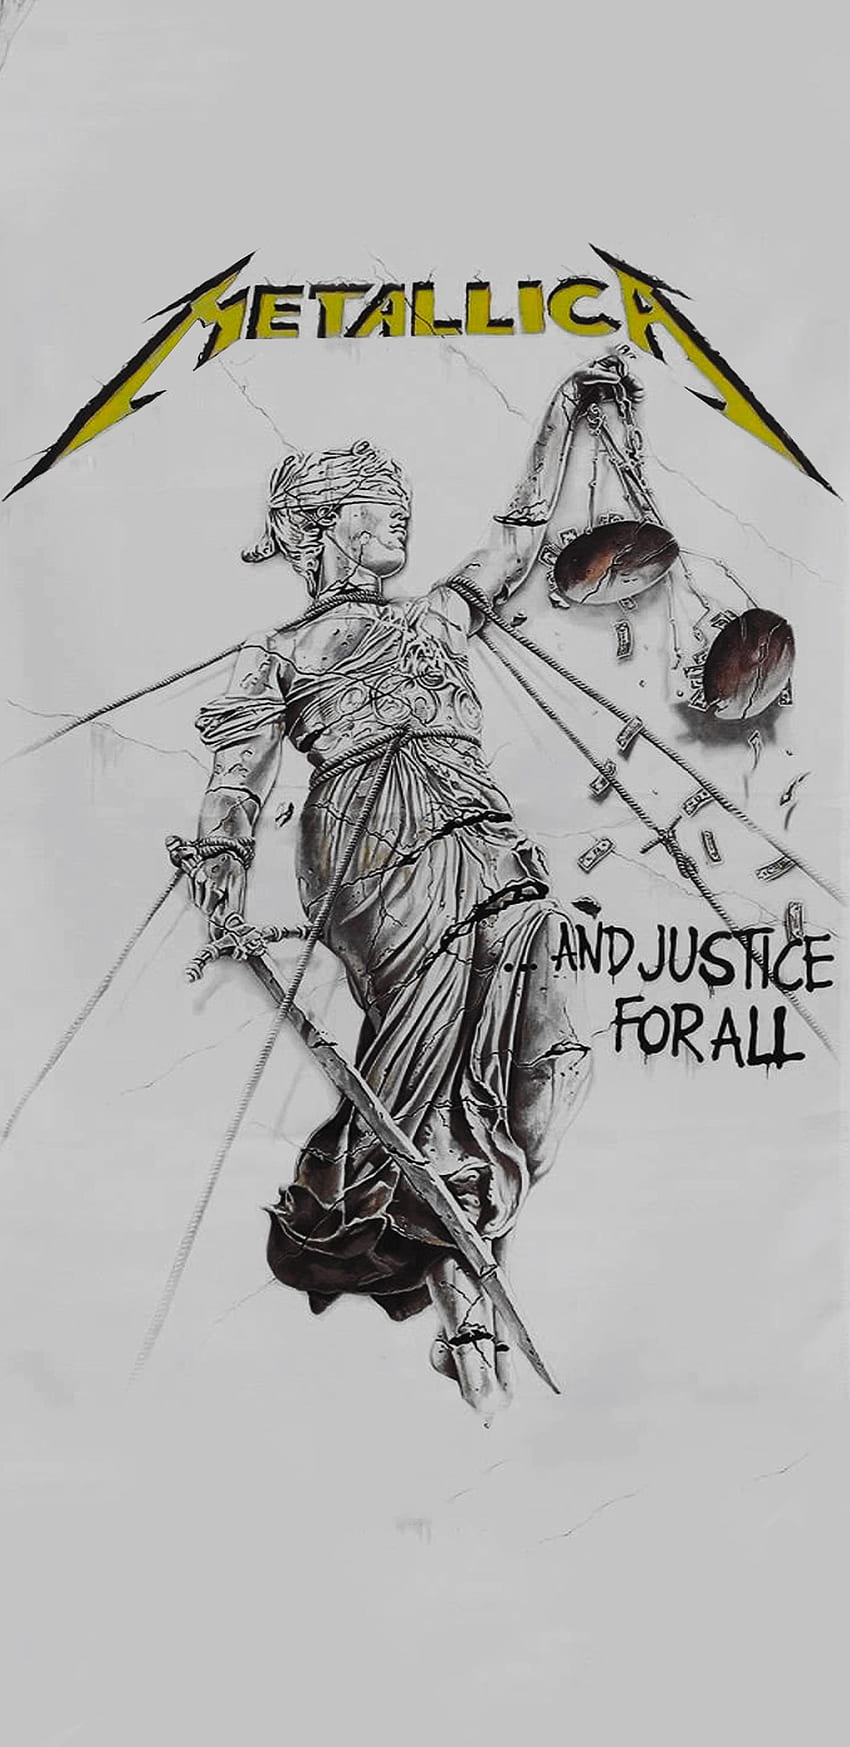 I always struggle to find good for my phone so i decided to make my own [] : Metallica, And Justice for All HD phone wallpaper